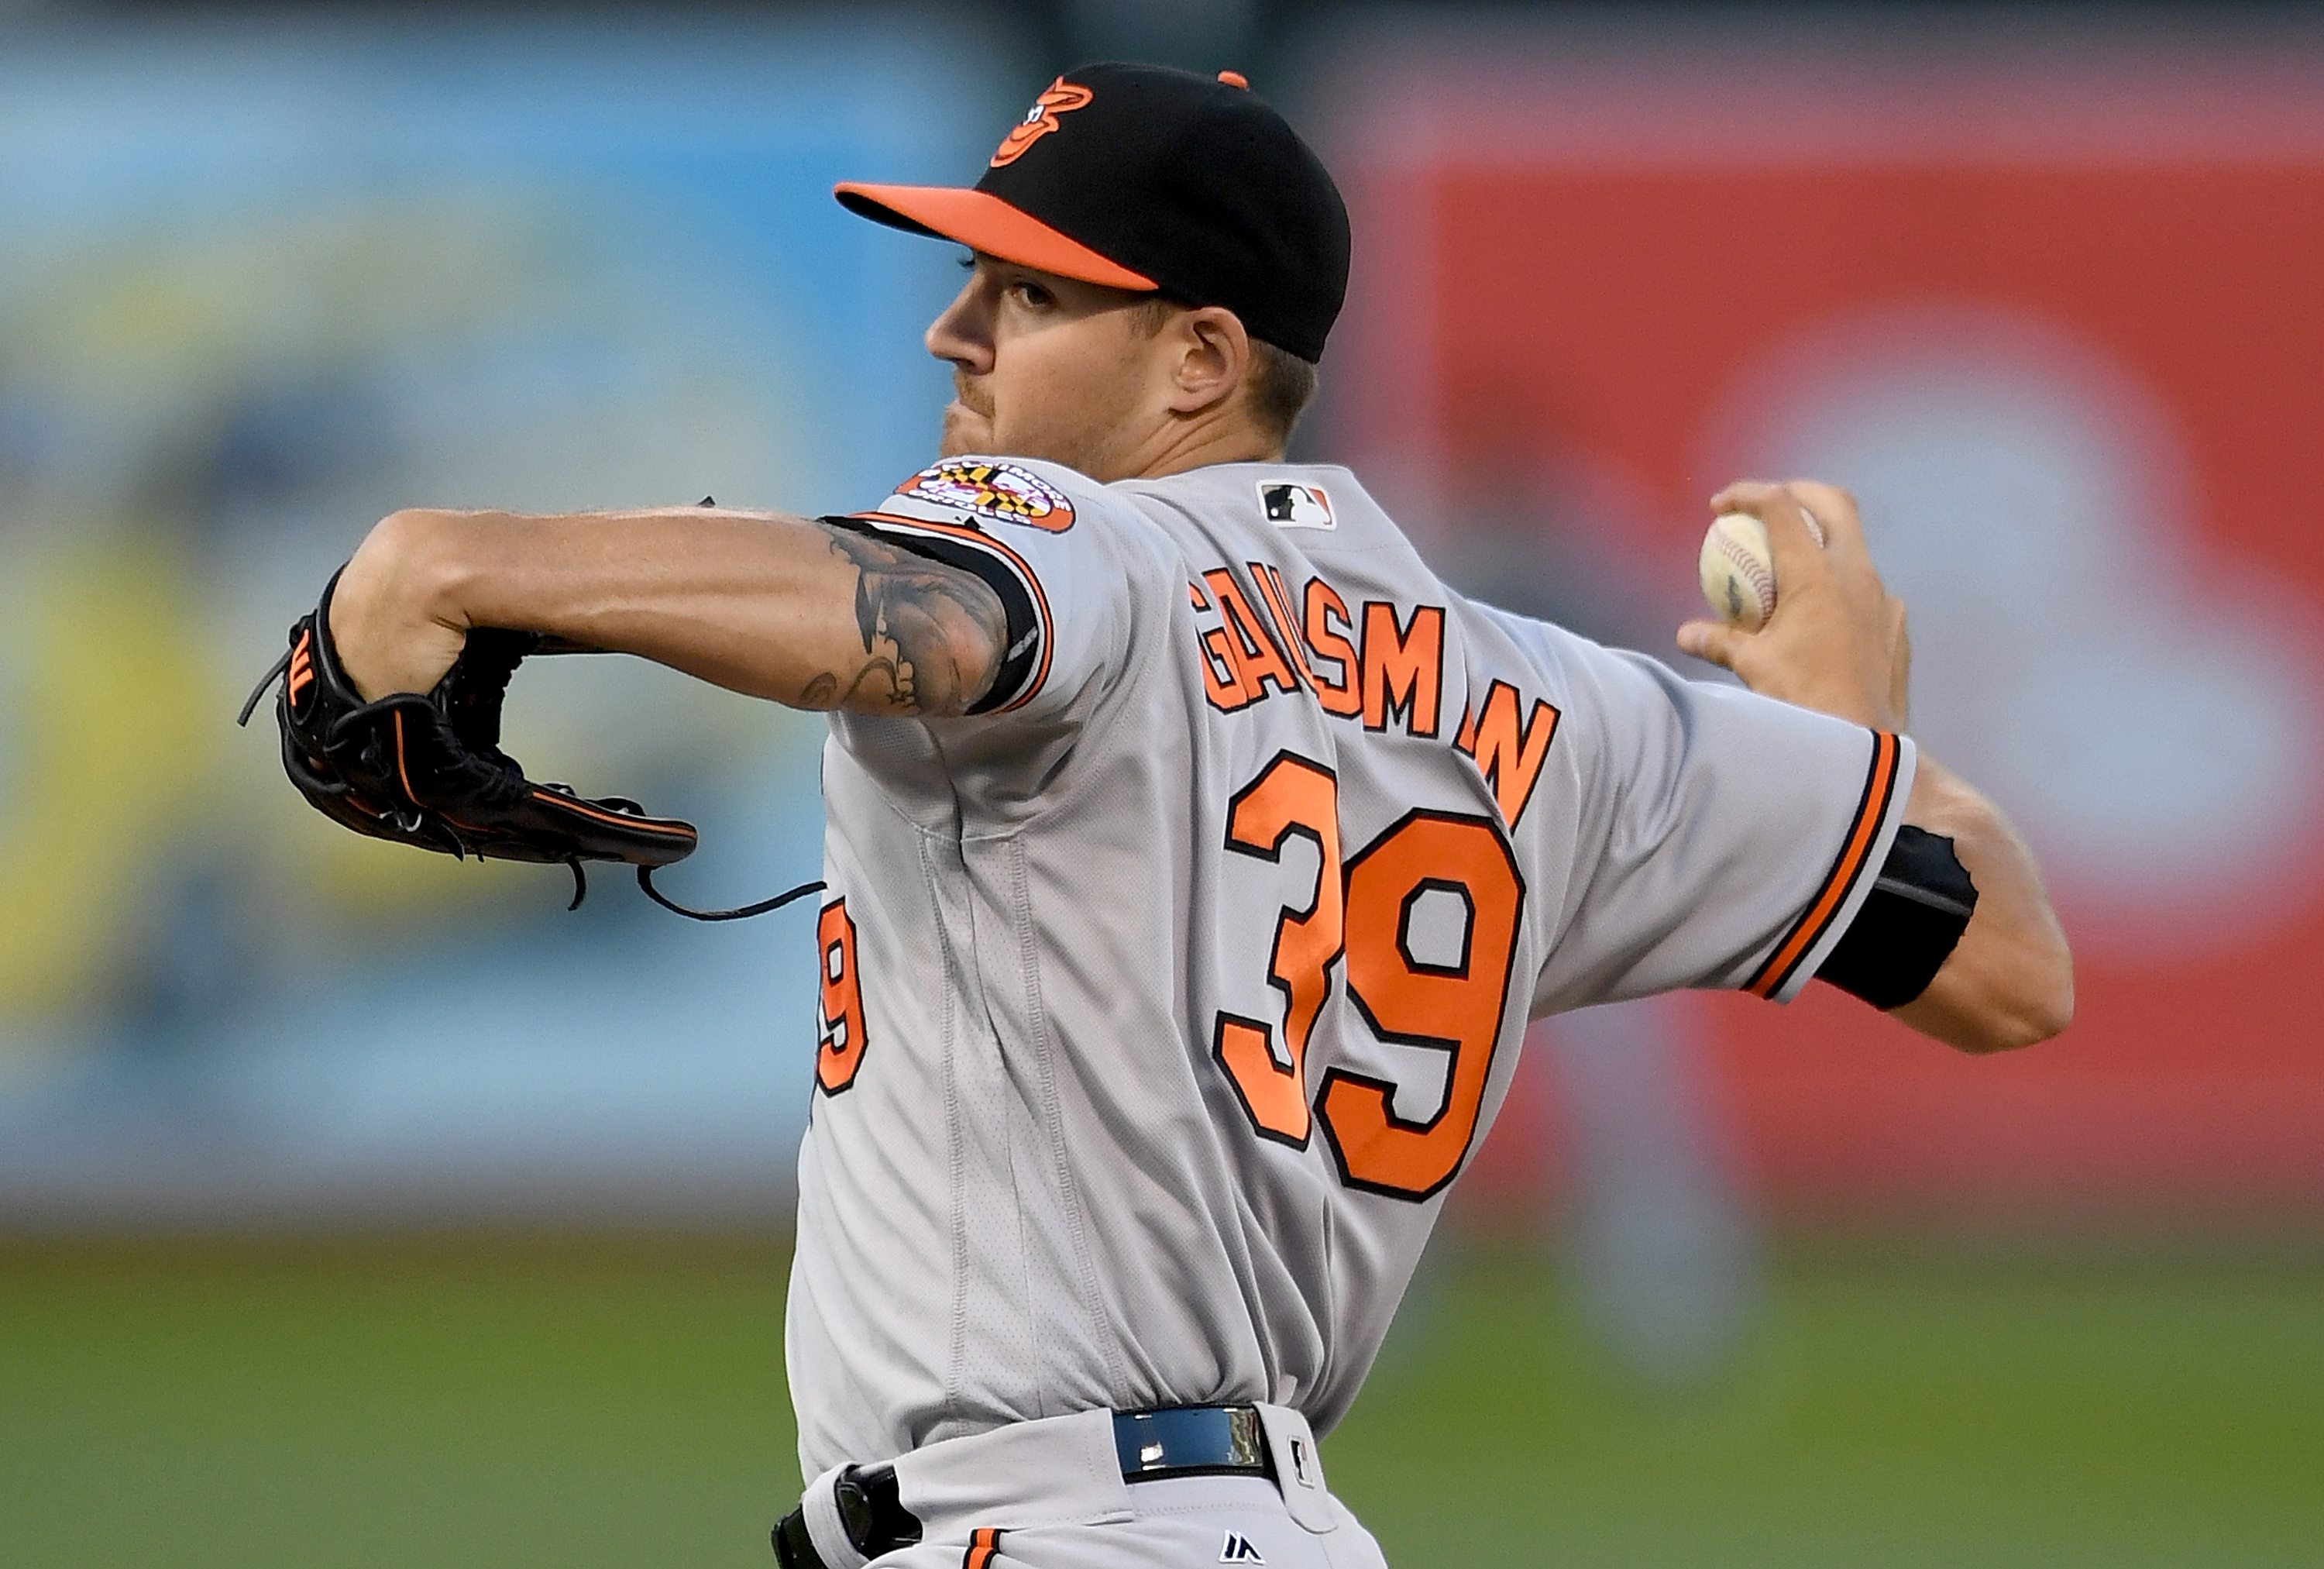 5 MLB Starting Pitchers Who Need to Build off a Strong Second Half